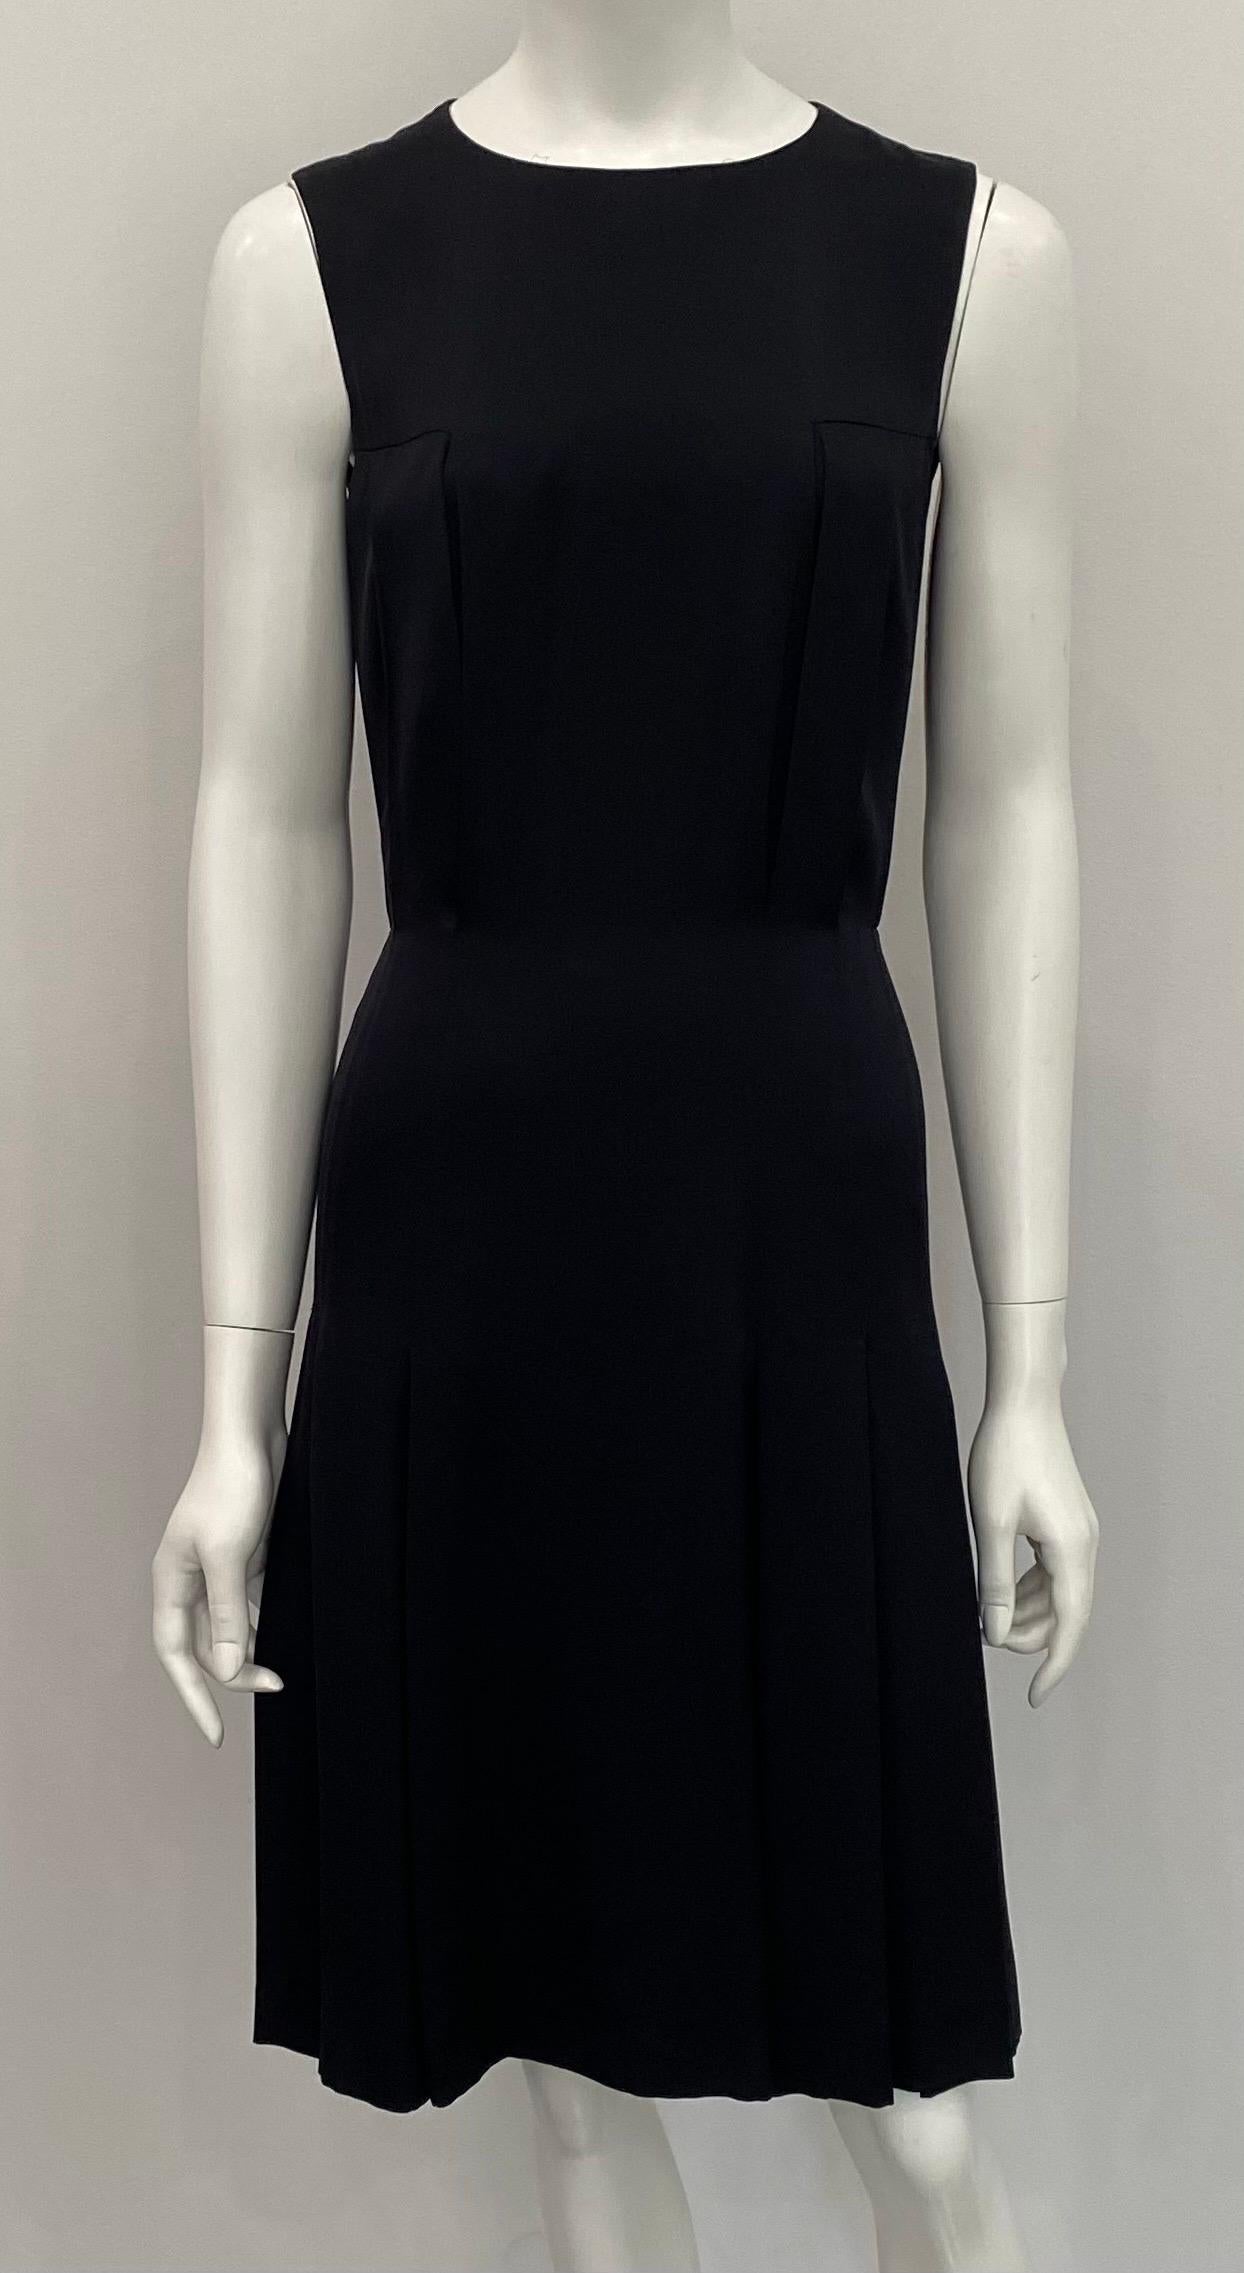 Chanel Black Silk Sleeveless Dress - 36 - Circa 01A. This classic black sleeveless dress by Chanel is fully lined in the classic camellia and cc print silk. The bodice of the dress has a round neckline and is someone fitted with three front pleat